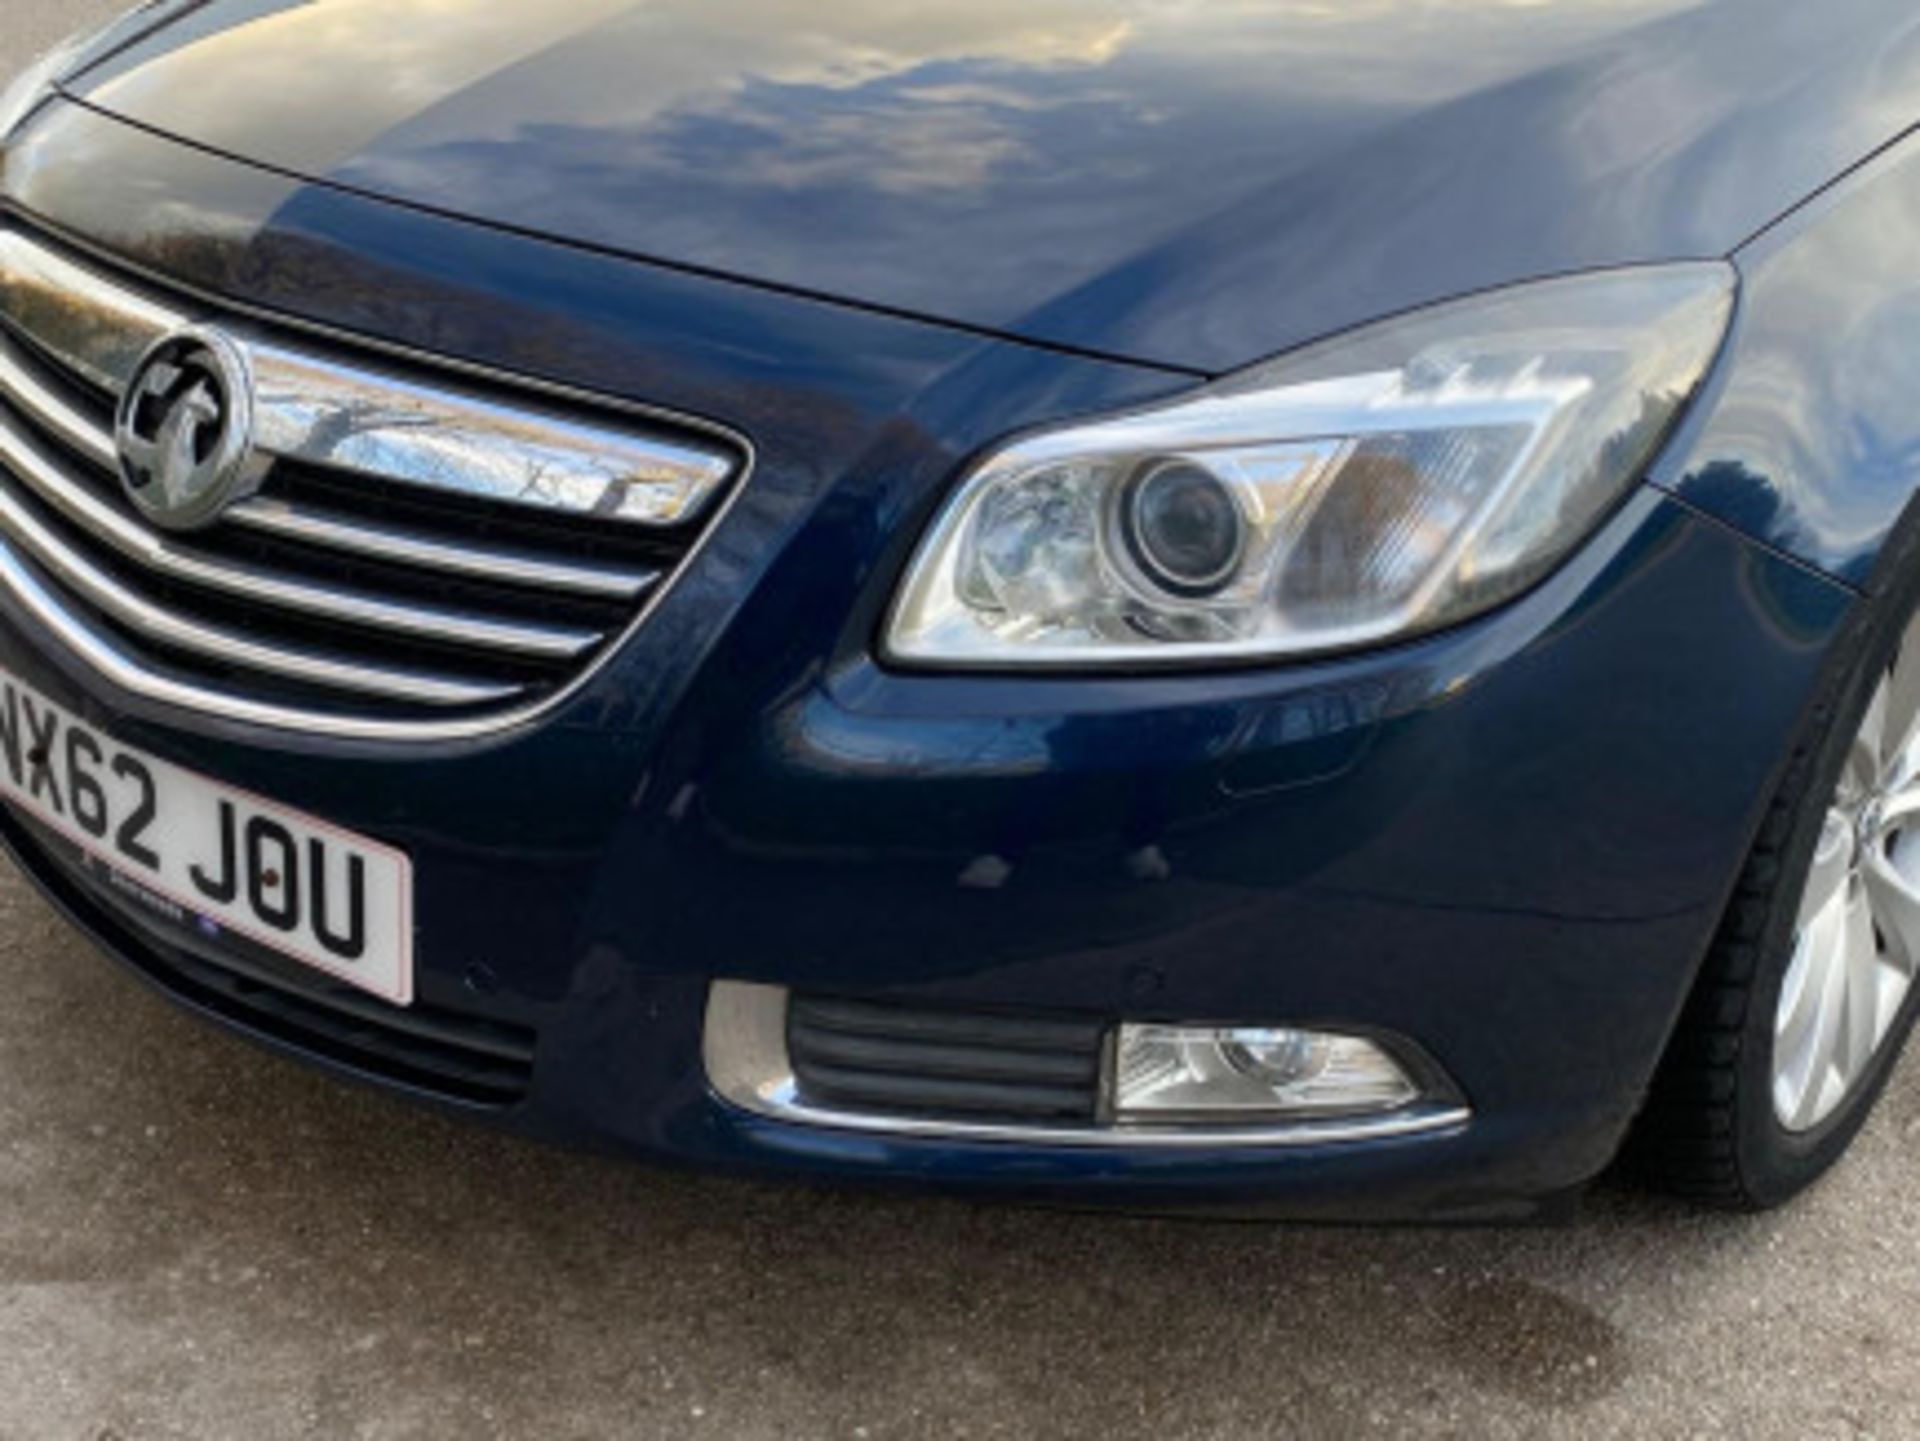 2012 VAUXHALL INSIGNIA 2.0 CDTI ELITE AUTO EURO 5 - DISCOVER EXCELLENCE >>--NO VAT ON HAMMER--<< - Image 44 of 120